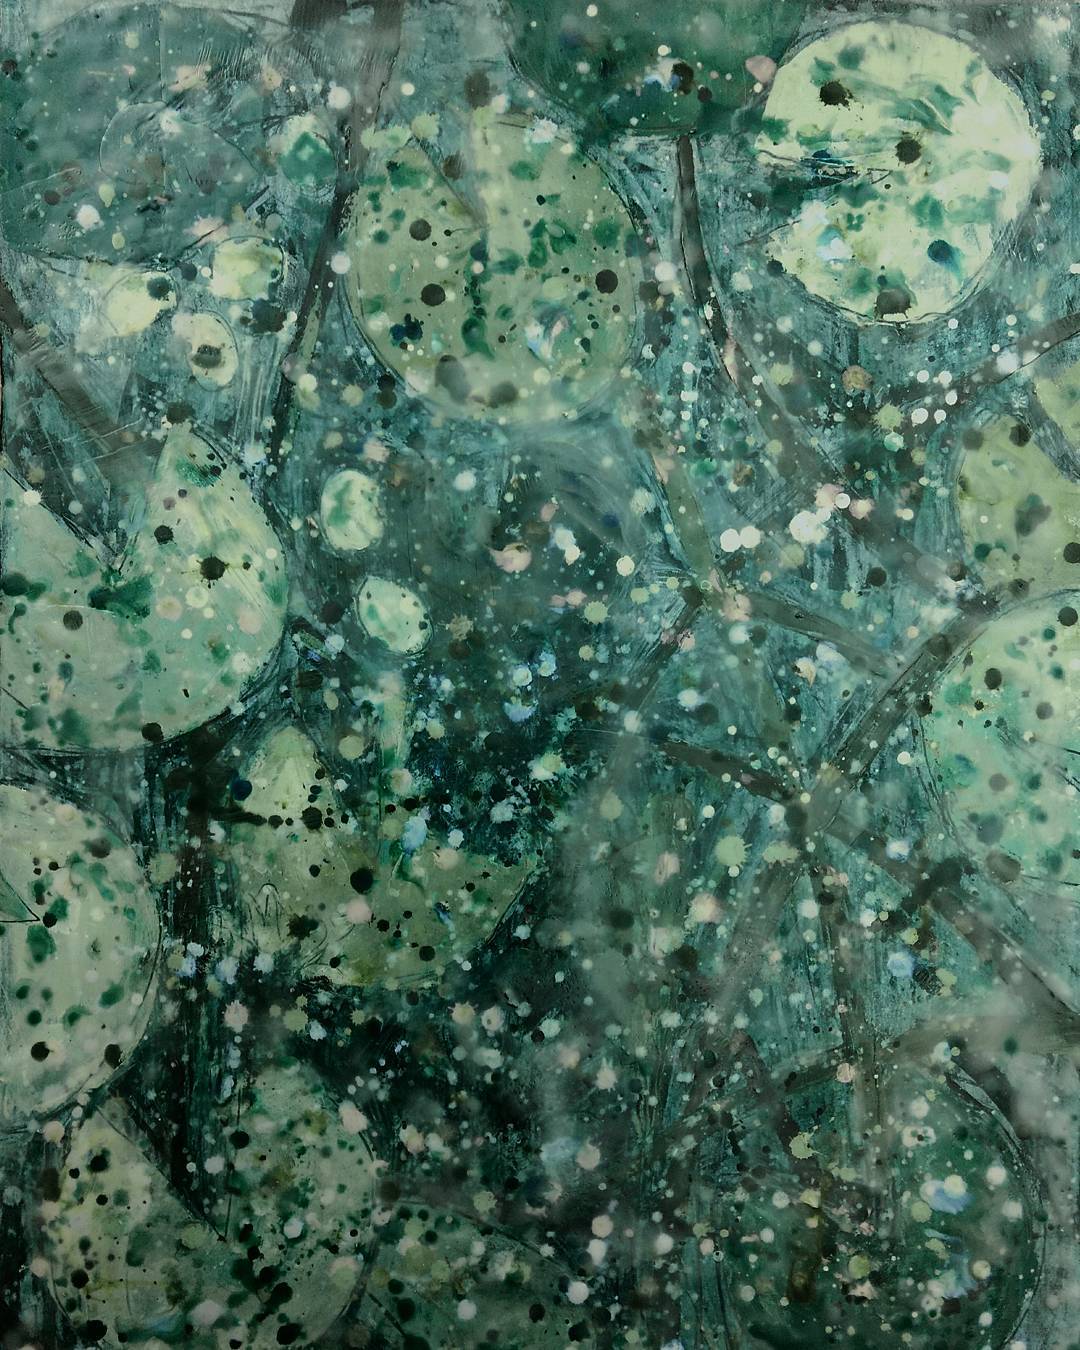 Another exploration of water lilies and water in encaustic